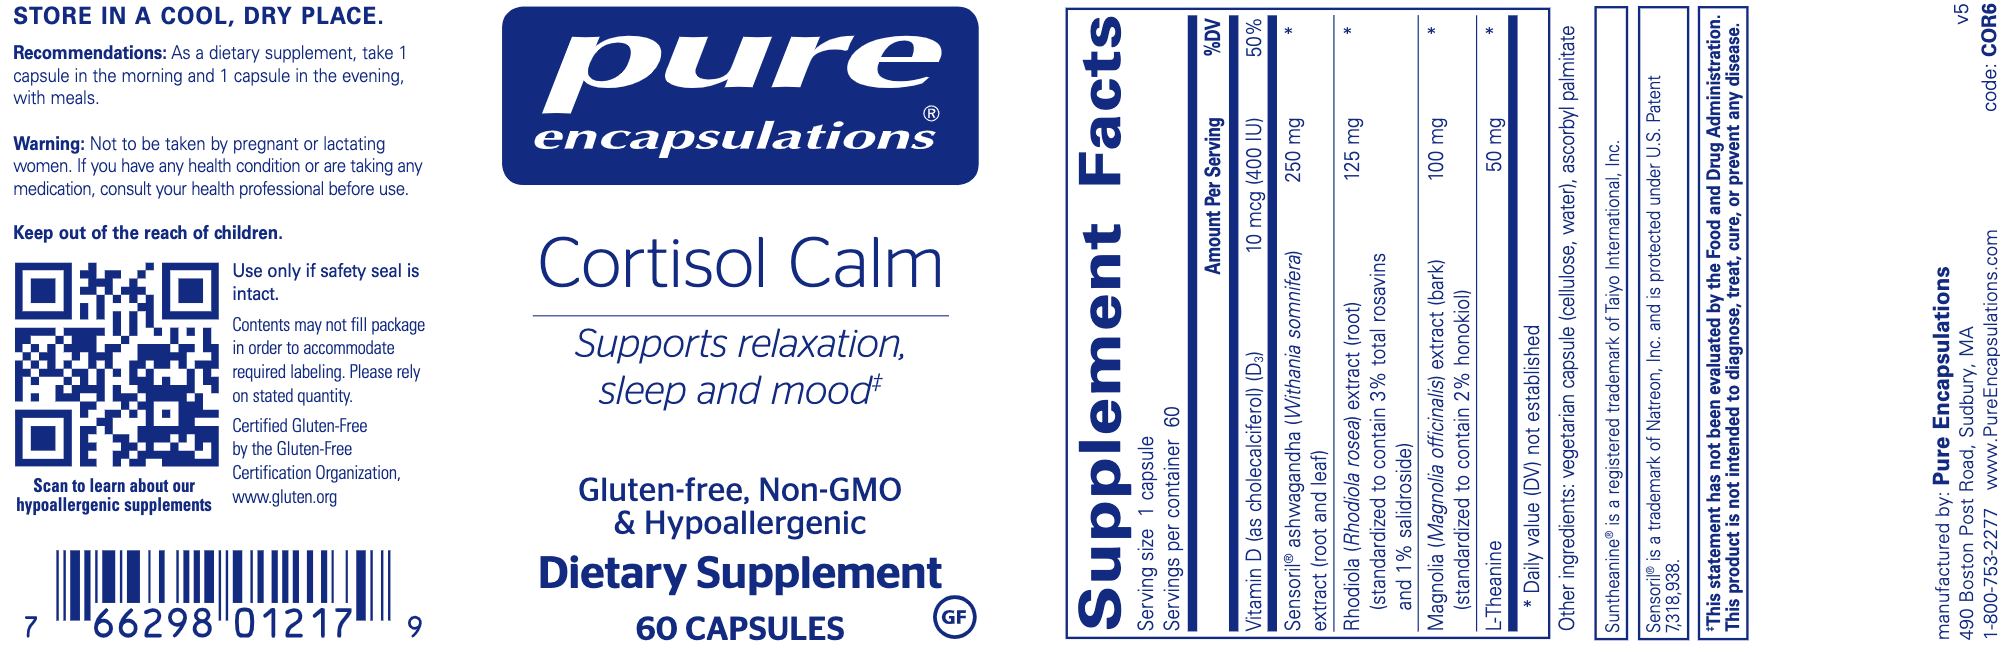 Cortisol Calm-Pure Encapsulations-Pine Street Clinic